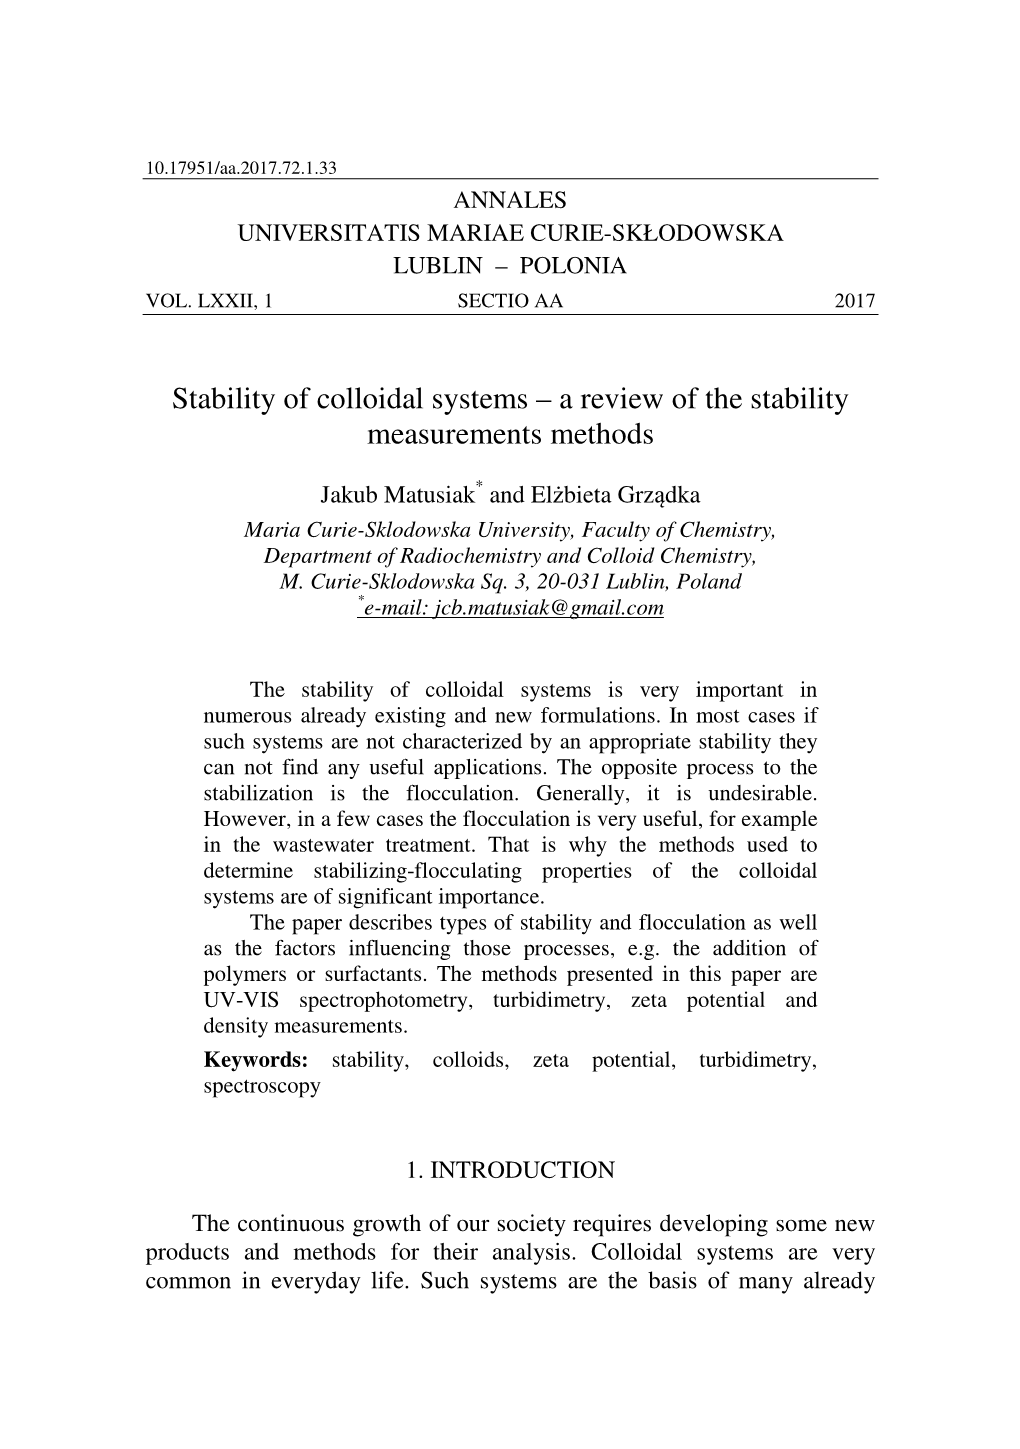 Stability of Colloidal Systems – a Review of the Stability Measurements Methods